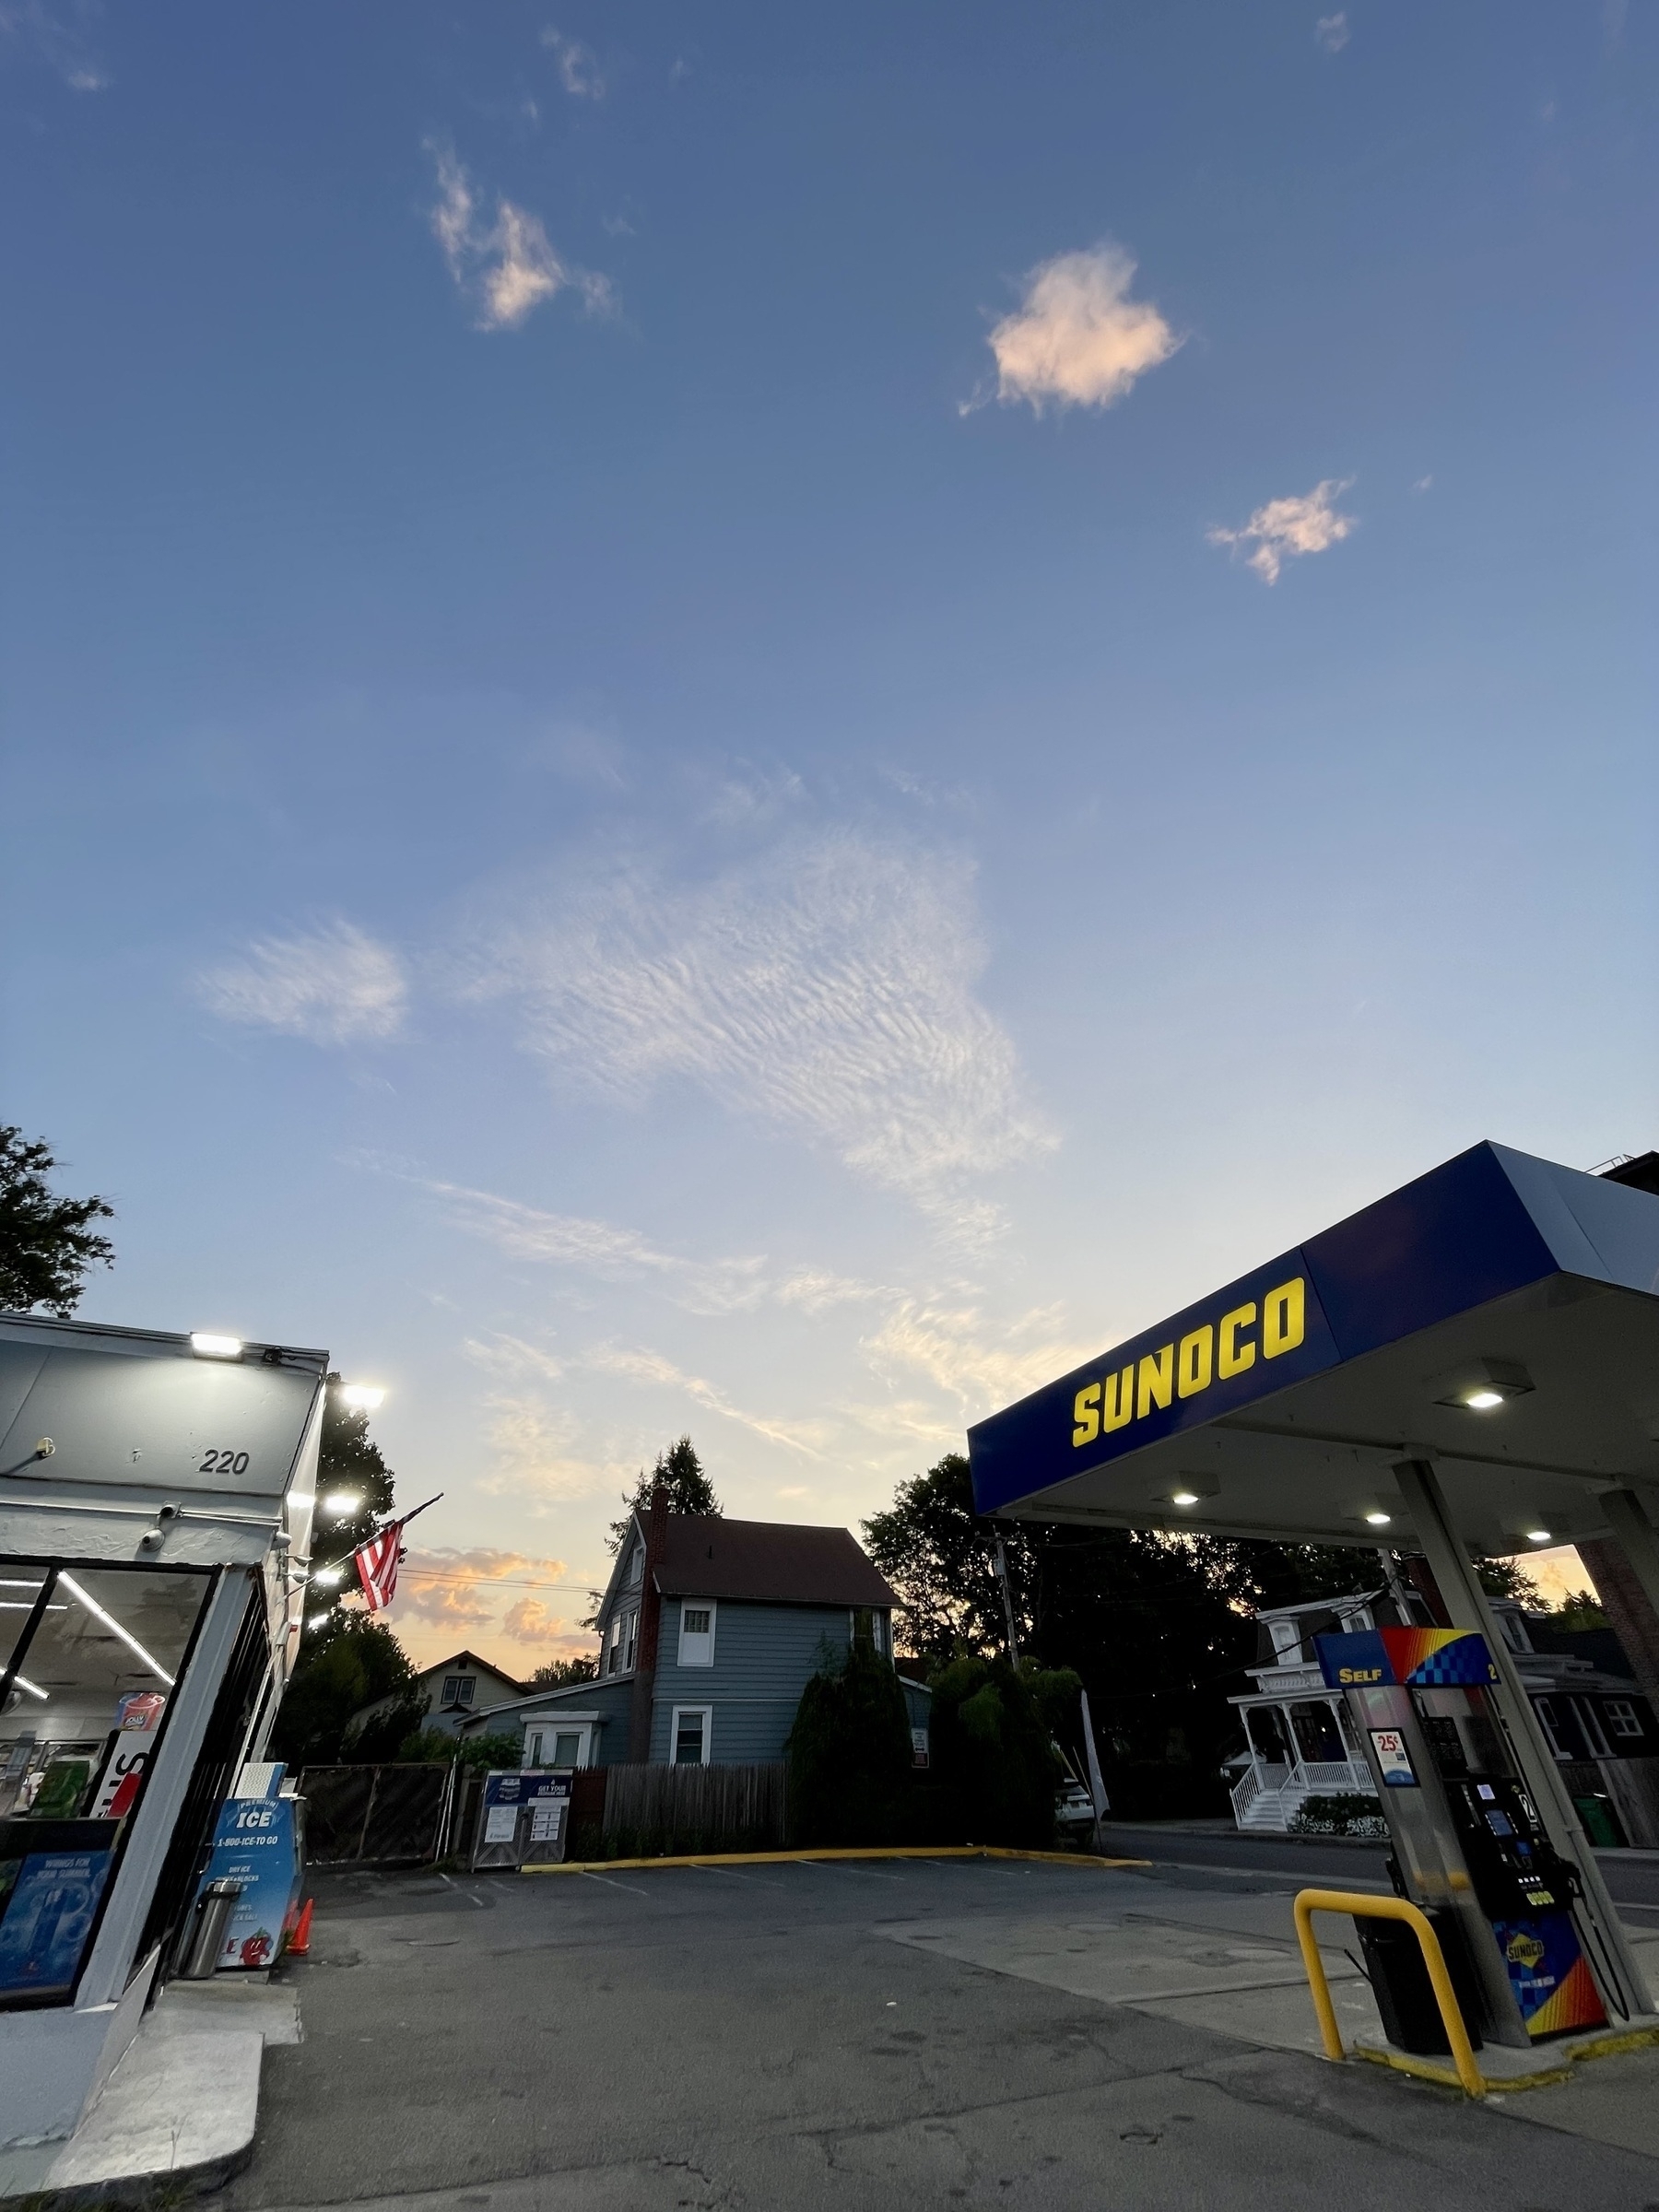 Sunoco gas station pumps on the right, convenience store on the left, sunrise sky above with fair-weather clouds. Made with very wide angle lens.